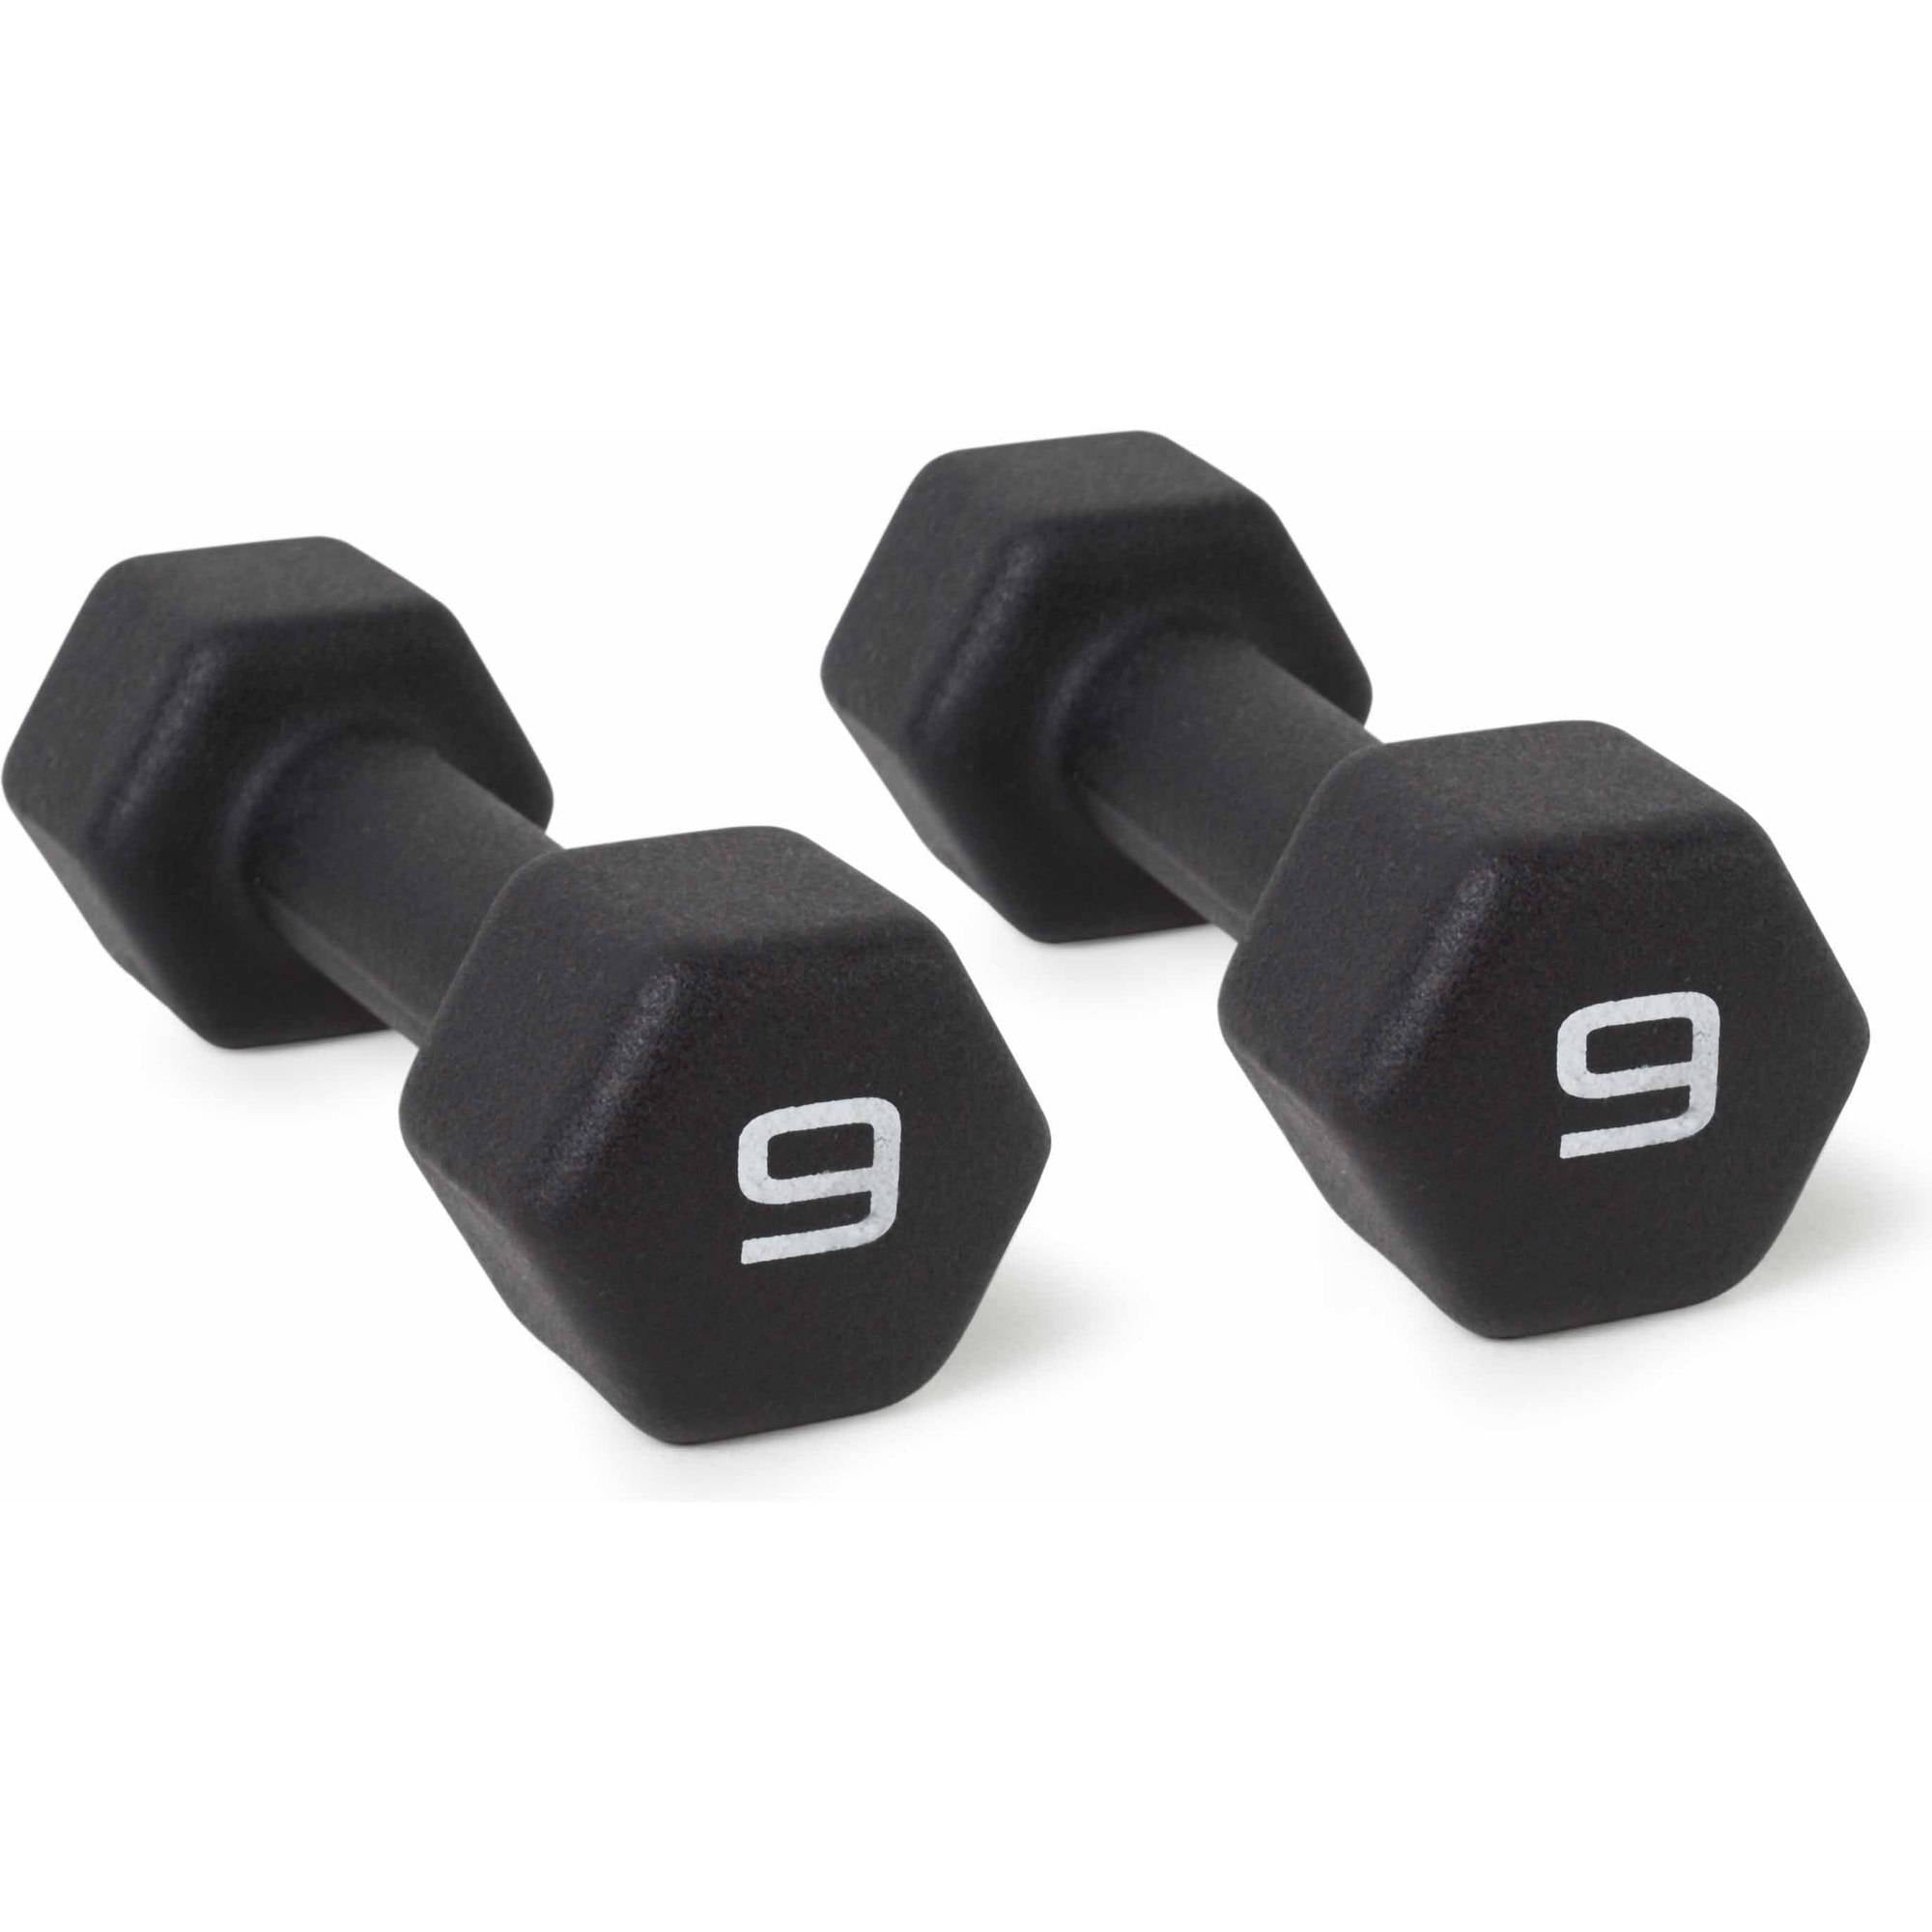 NEW Cap Barbell Workout FItness Neoprene Dumbbell 9 Pound Red FREE SHIPPING 